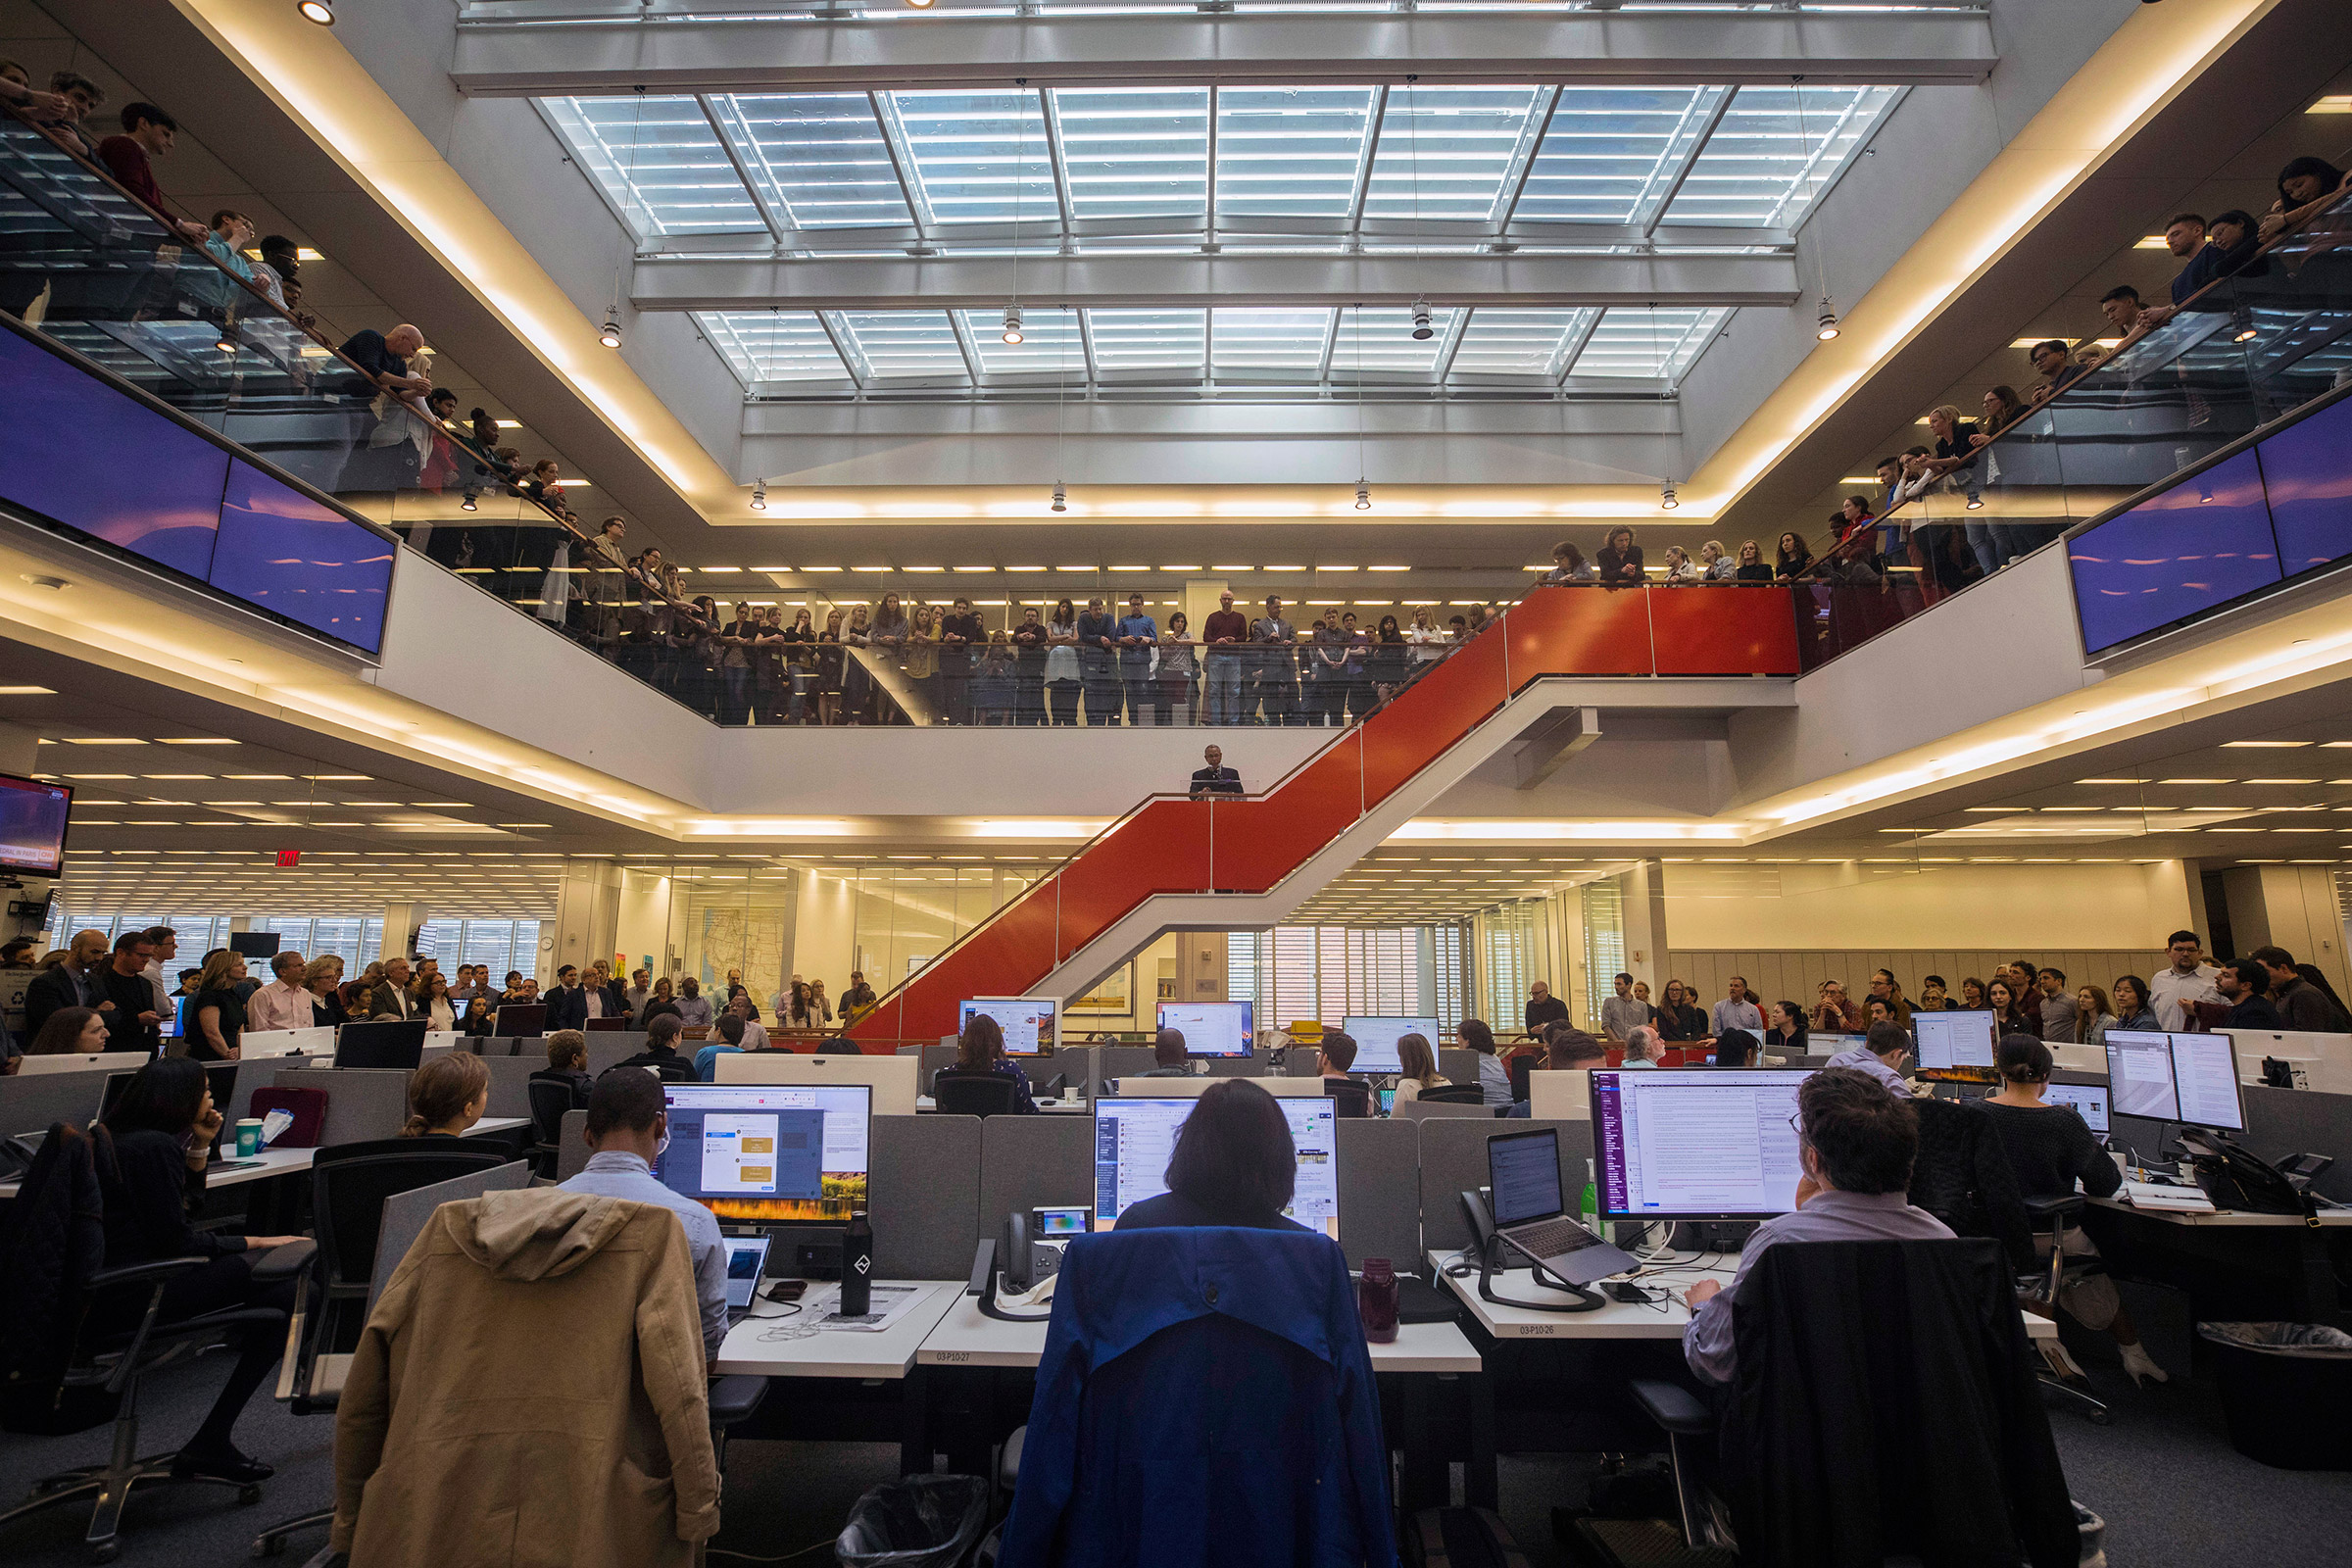 The newsroom gathers in April for Pulitzer announcements (Hiroko Masuike—The New York Times/Redux)